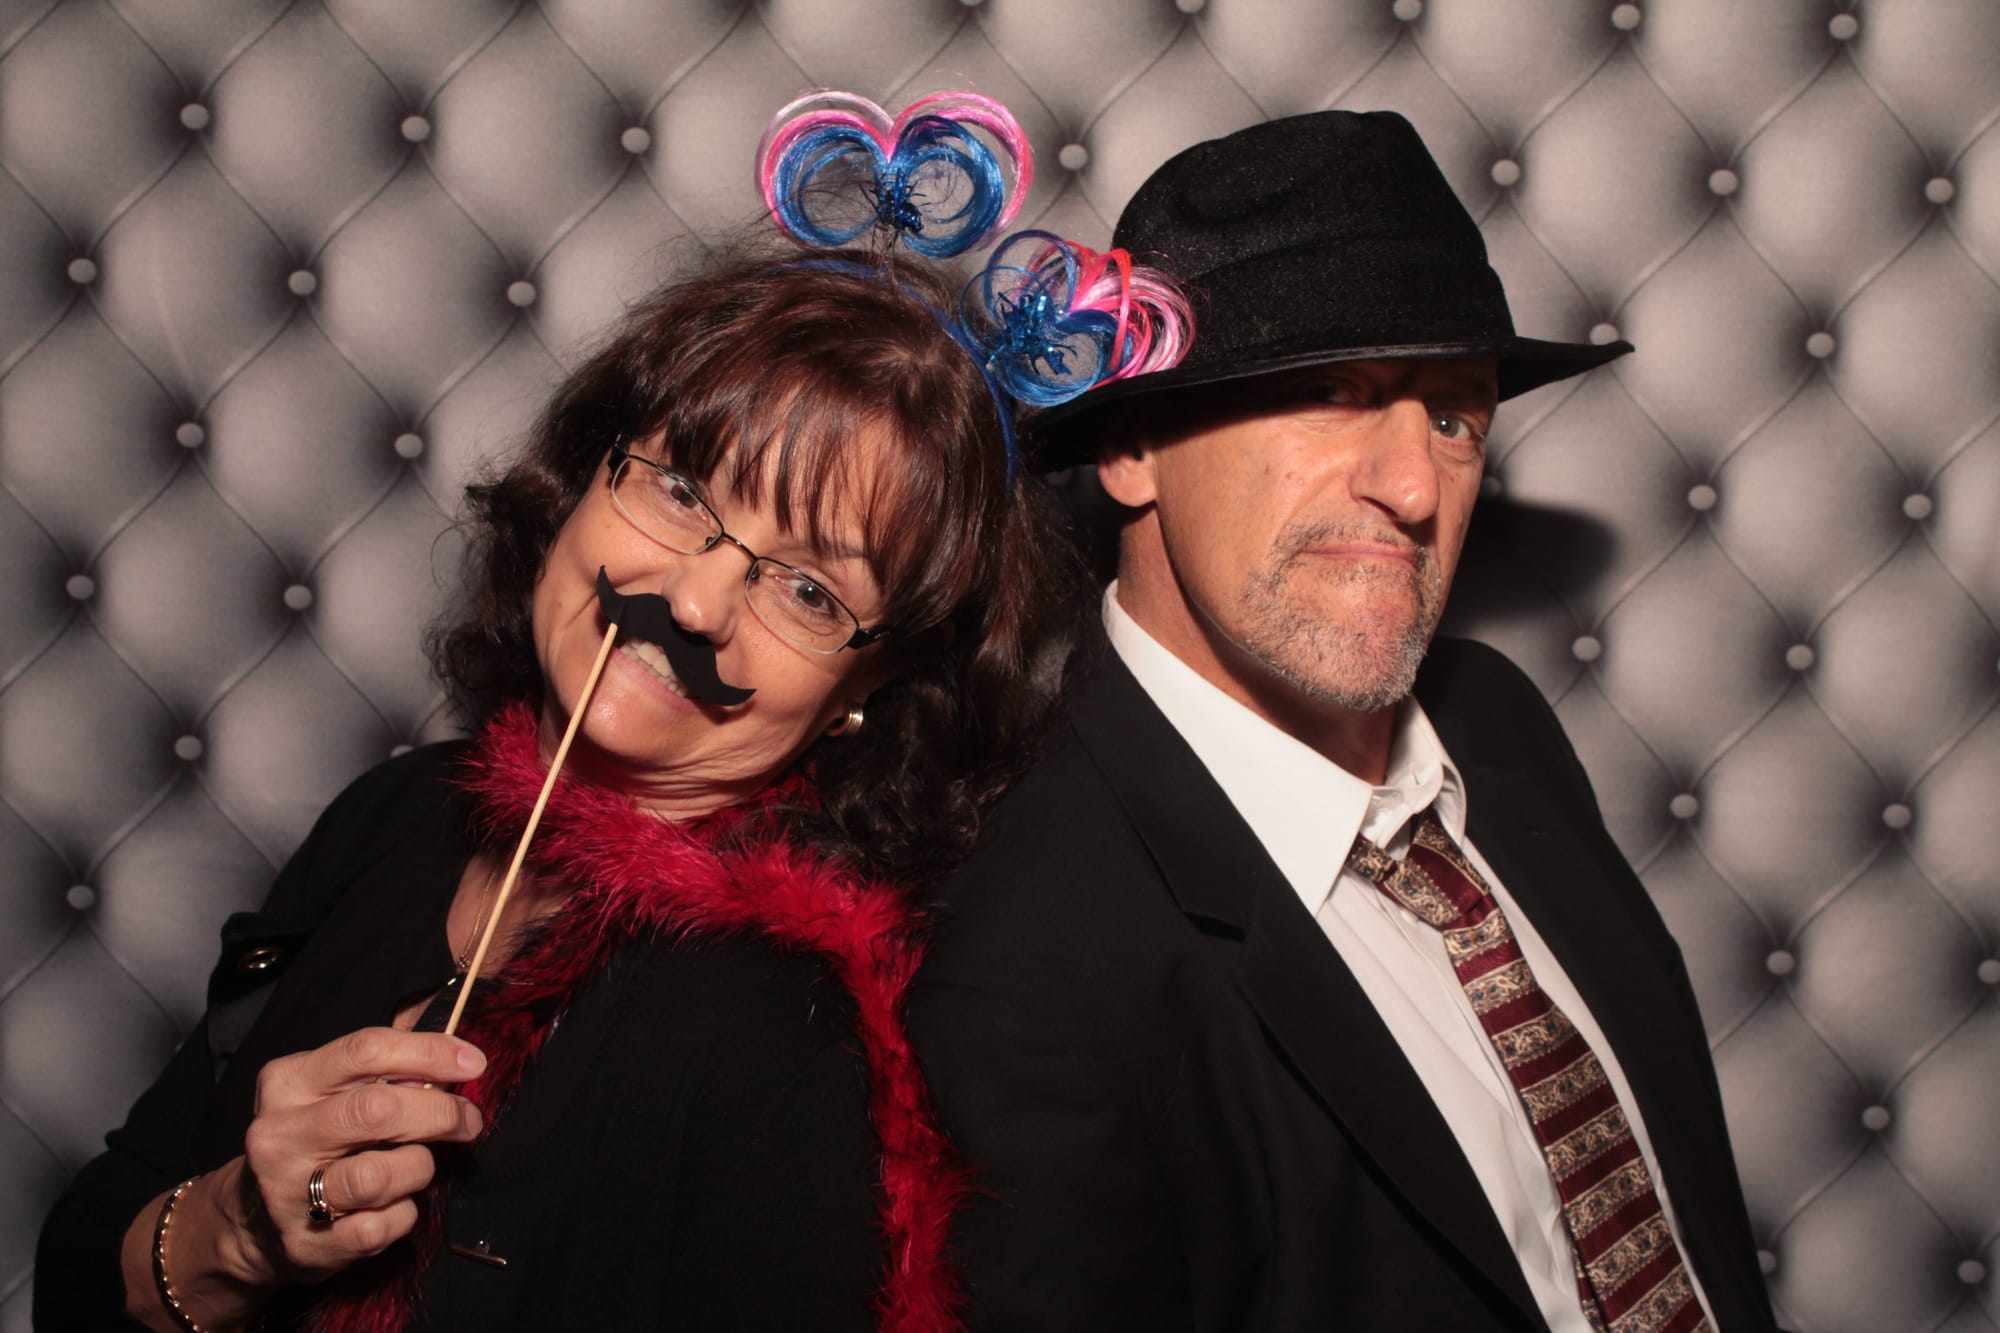 Photo Booth-Rental-Wedding-Winery-Driftwood-Props-Memories-No. 1-Reception-Backdrops